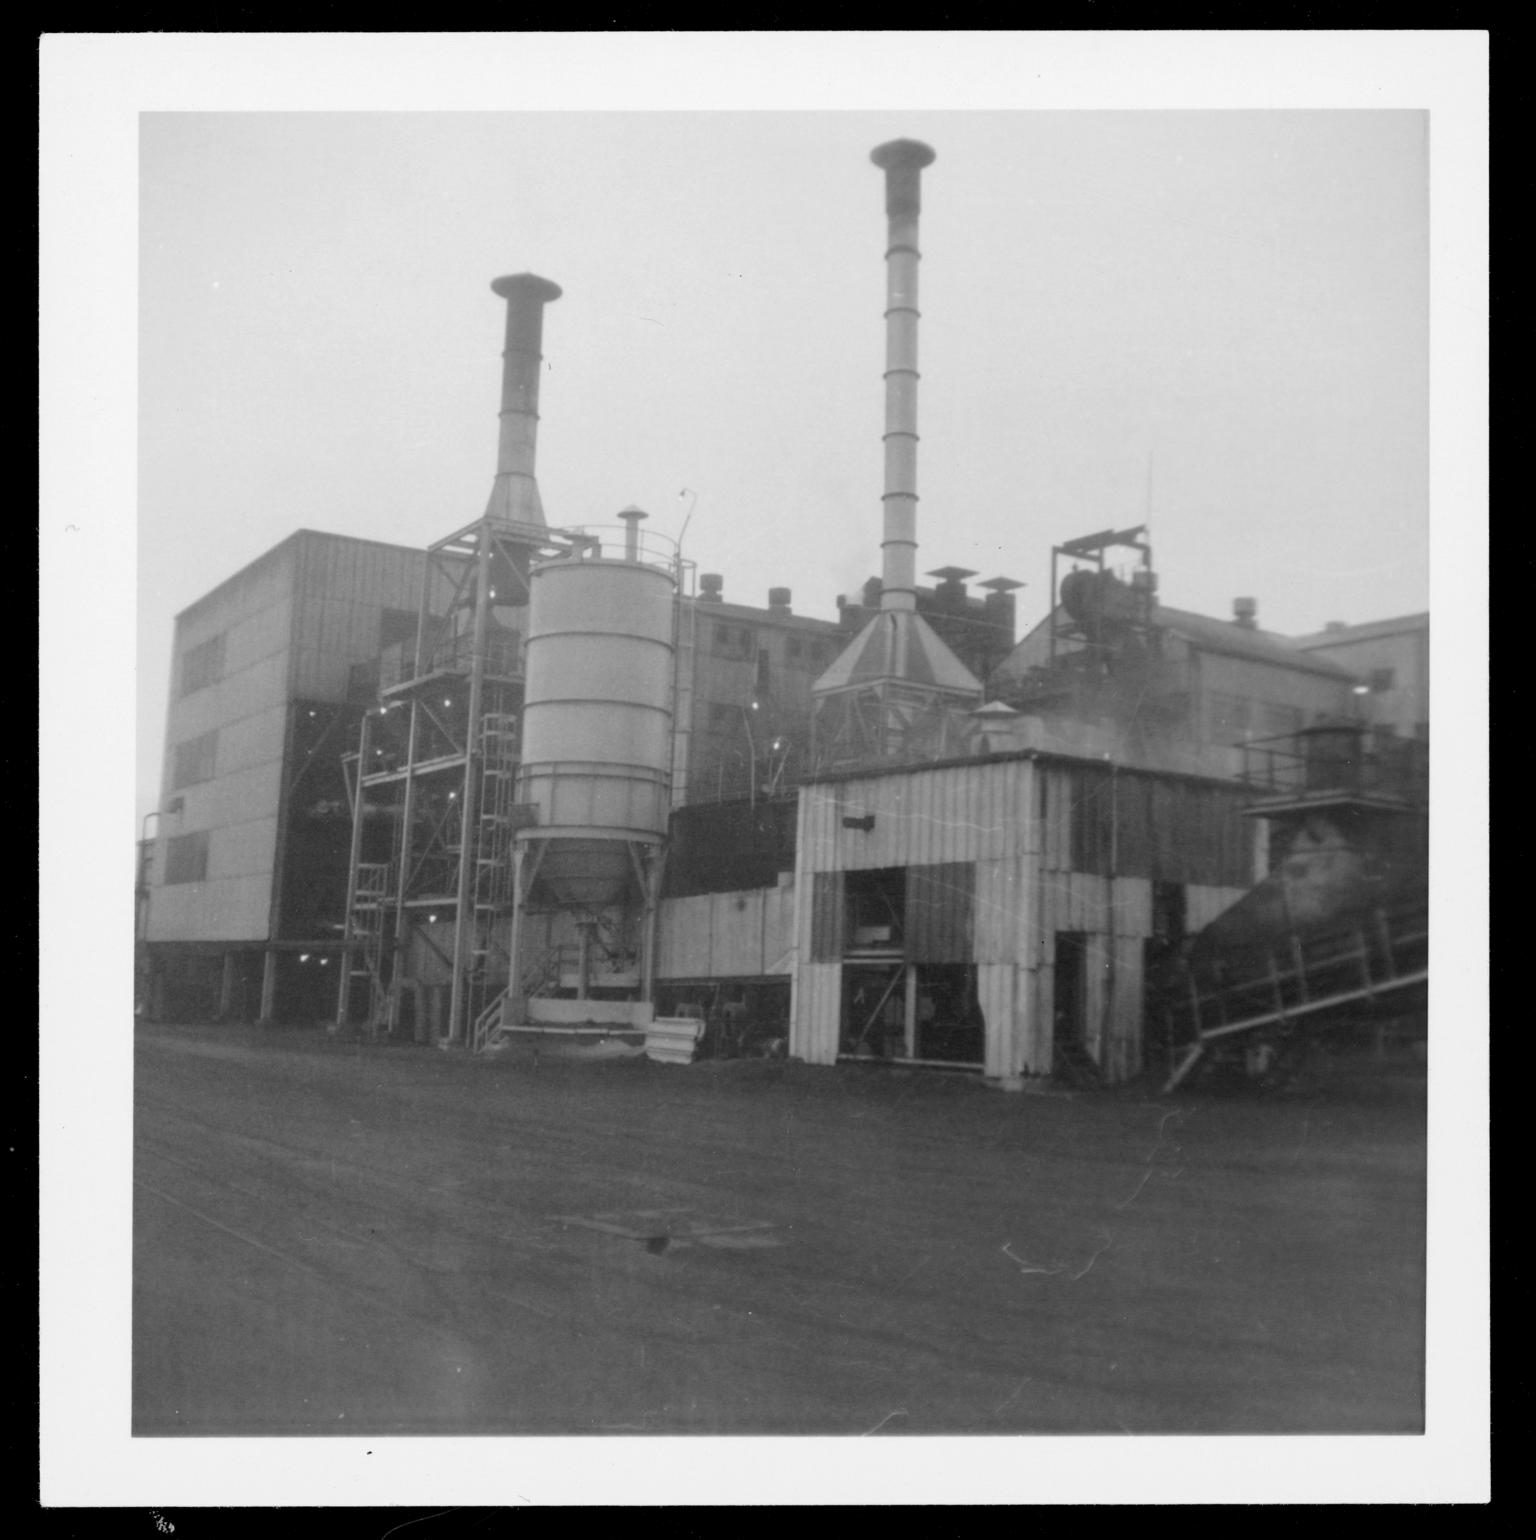 Crown patent fuel works, Cardiff, photograph